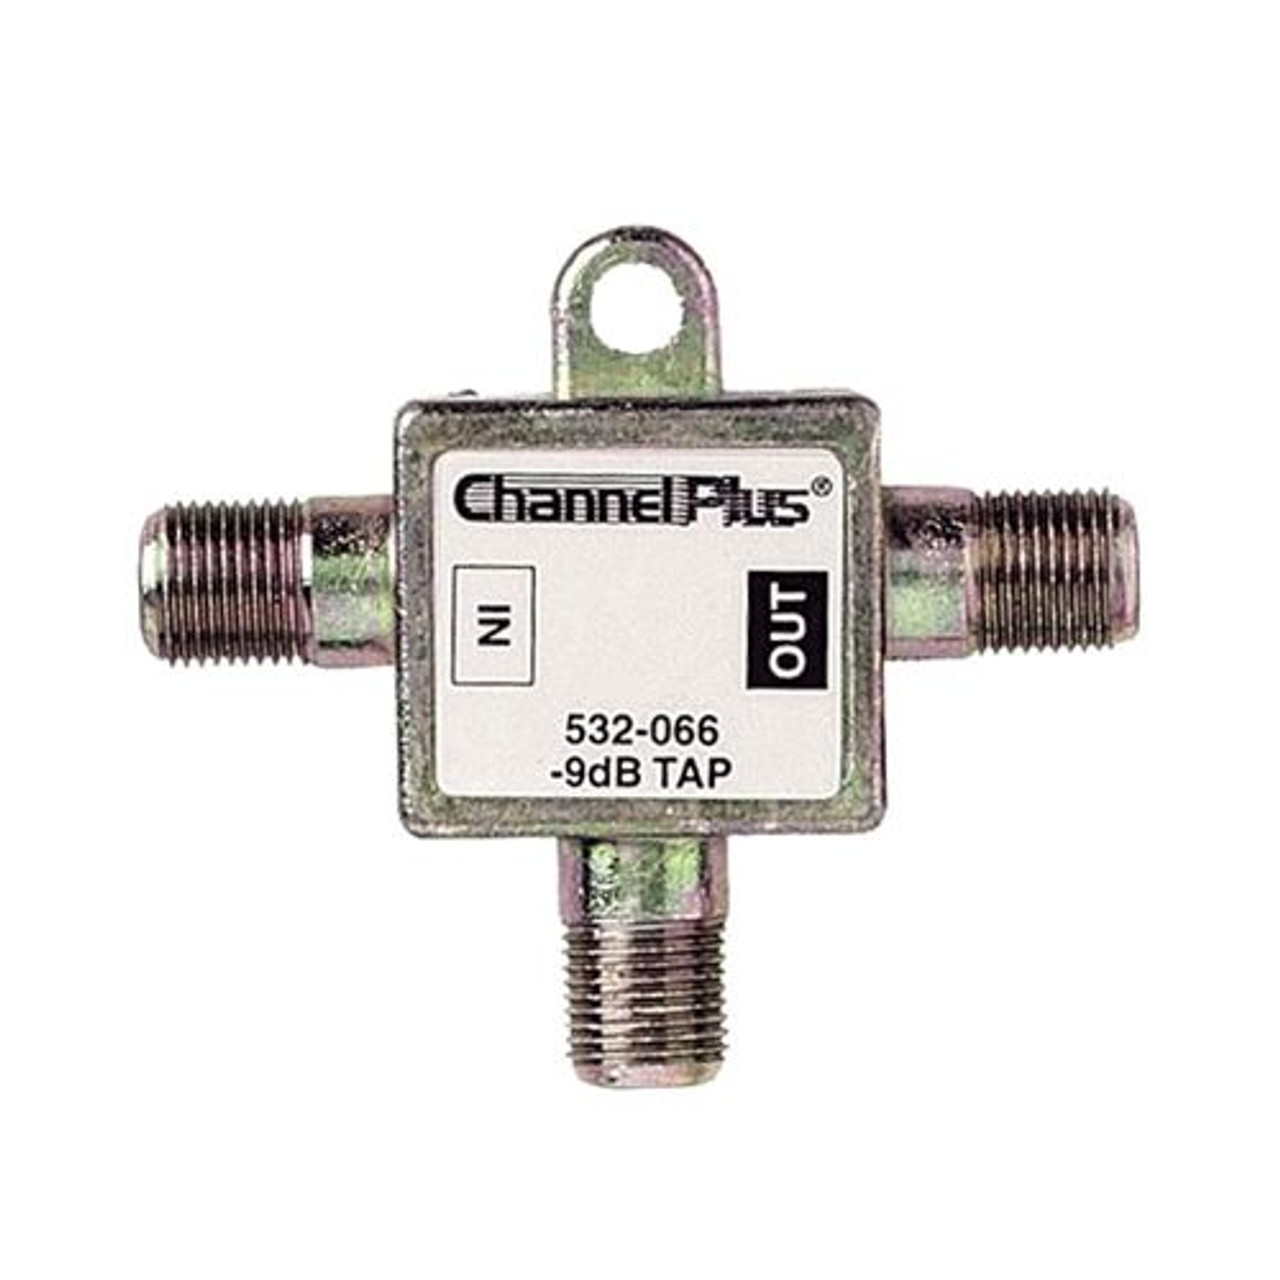 Channel Plus 2509 9 dB Directional Tap 1 GHz Bandwidth Combiner 75 Ohm 10 Pack Signal Bandwidth Combiner 2 Way Splitter with 1dB Minimal Output Loss and 9db High Loss Signal Strength Adapter, Part # 2509